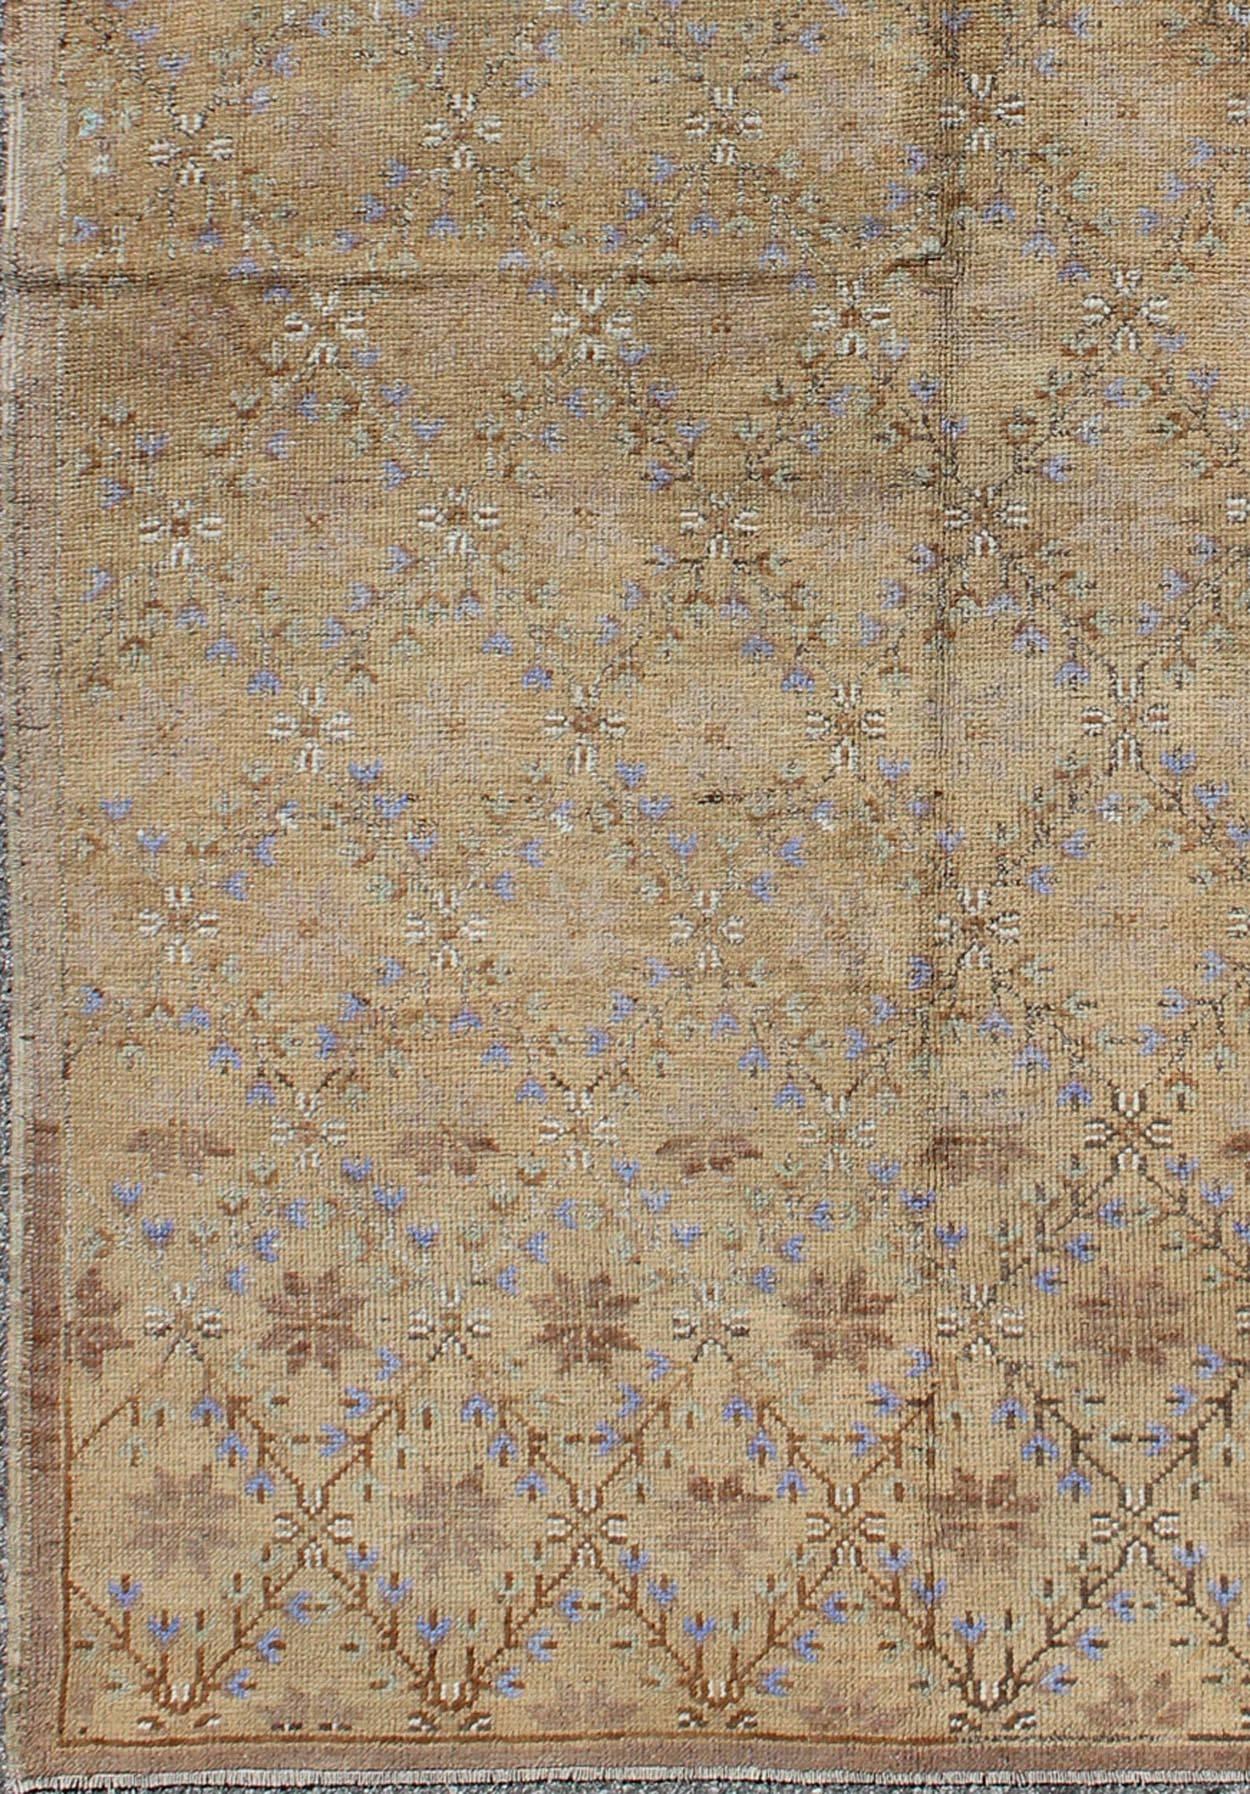 Outstanding floral patterns replenish the field in this wonderful Oushak. The various shades of light blue and periwinkle are sprinkled across the light mocha and camel color background to form a magnificent blend of warm colors.

Measures: 4'10'' x